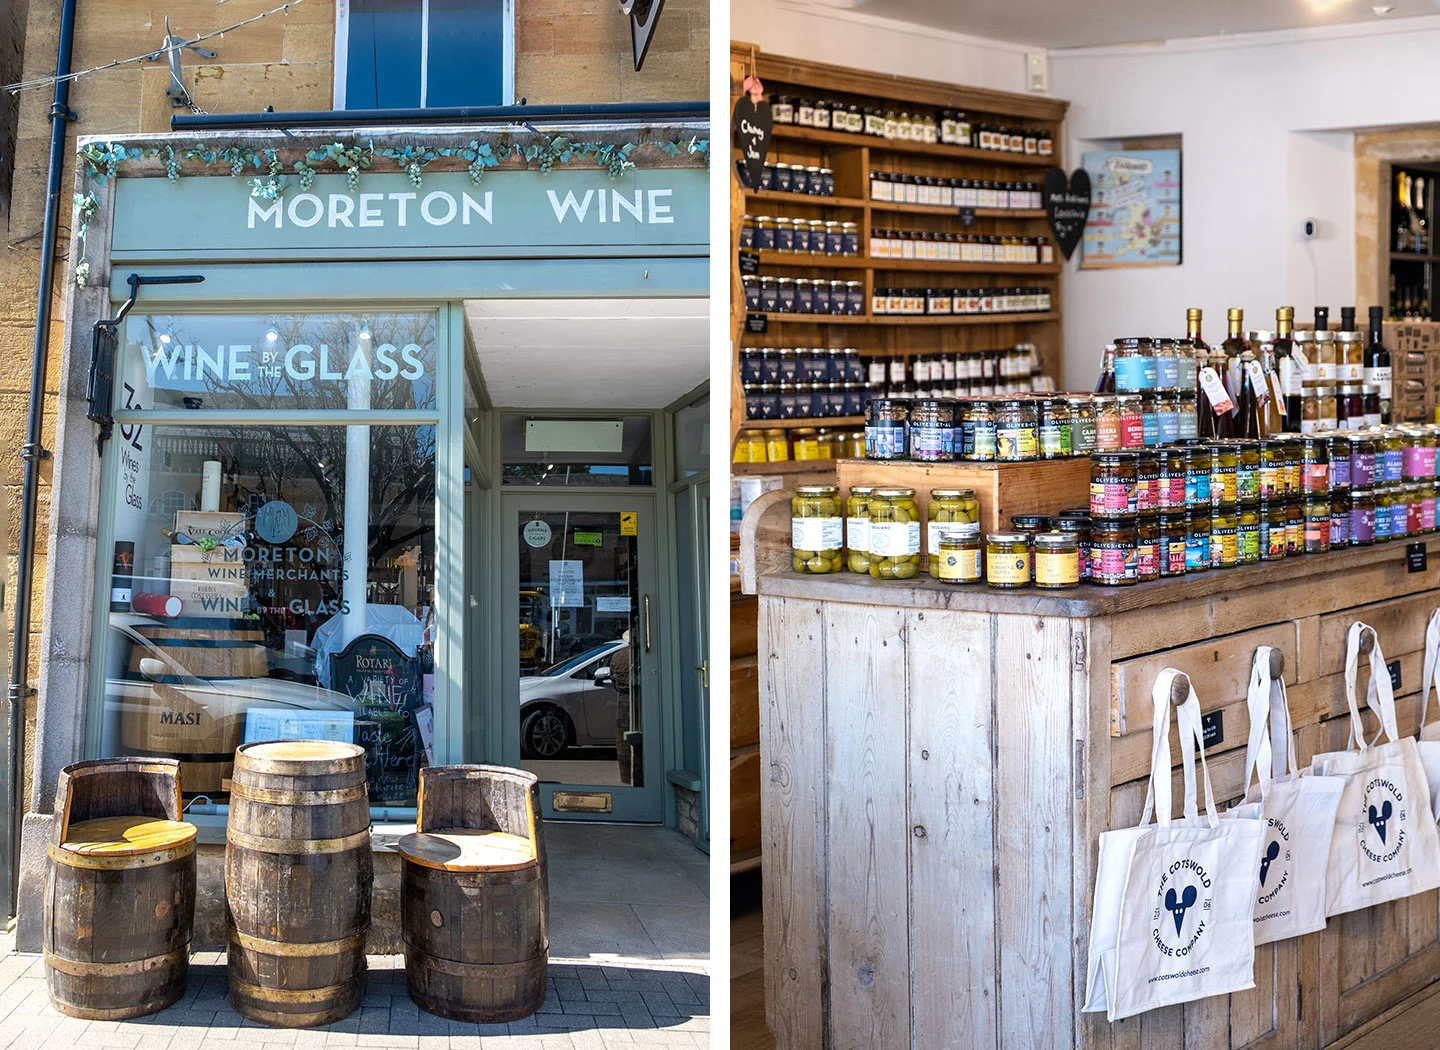 Moreton Wine Merchants and The Cotswold Cheese Company in Moreton-in-Marsh, Cotswolds